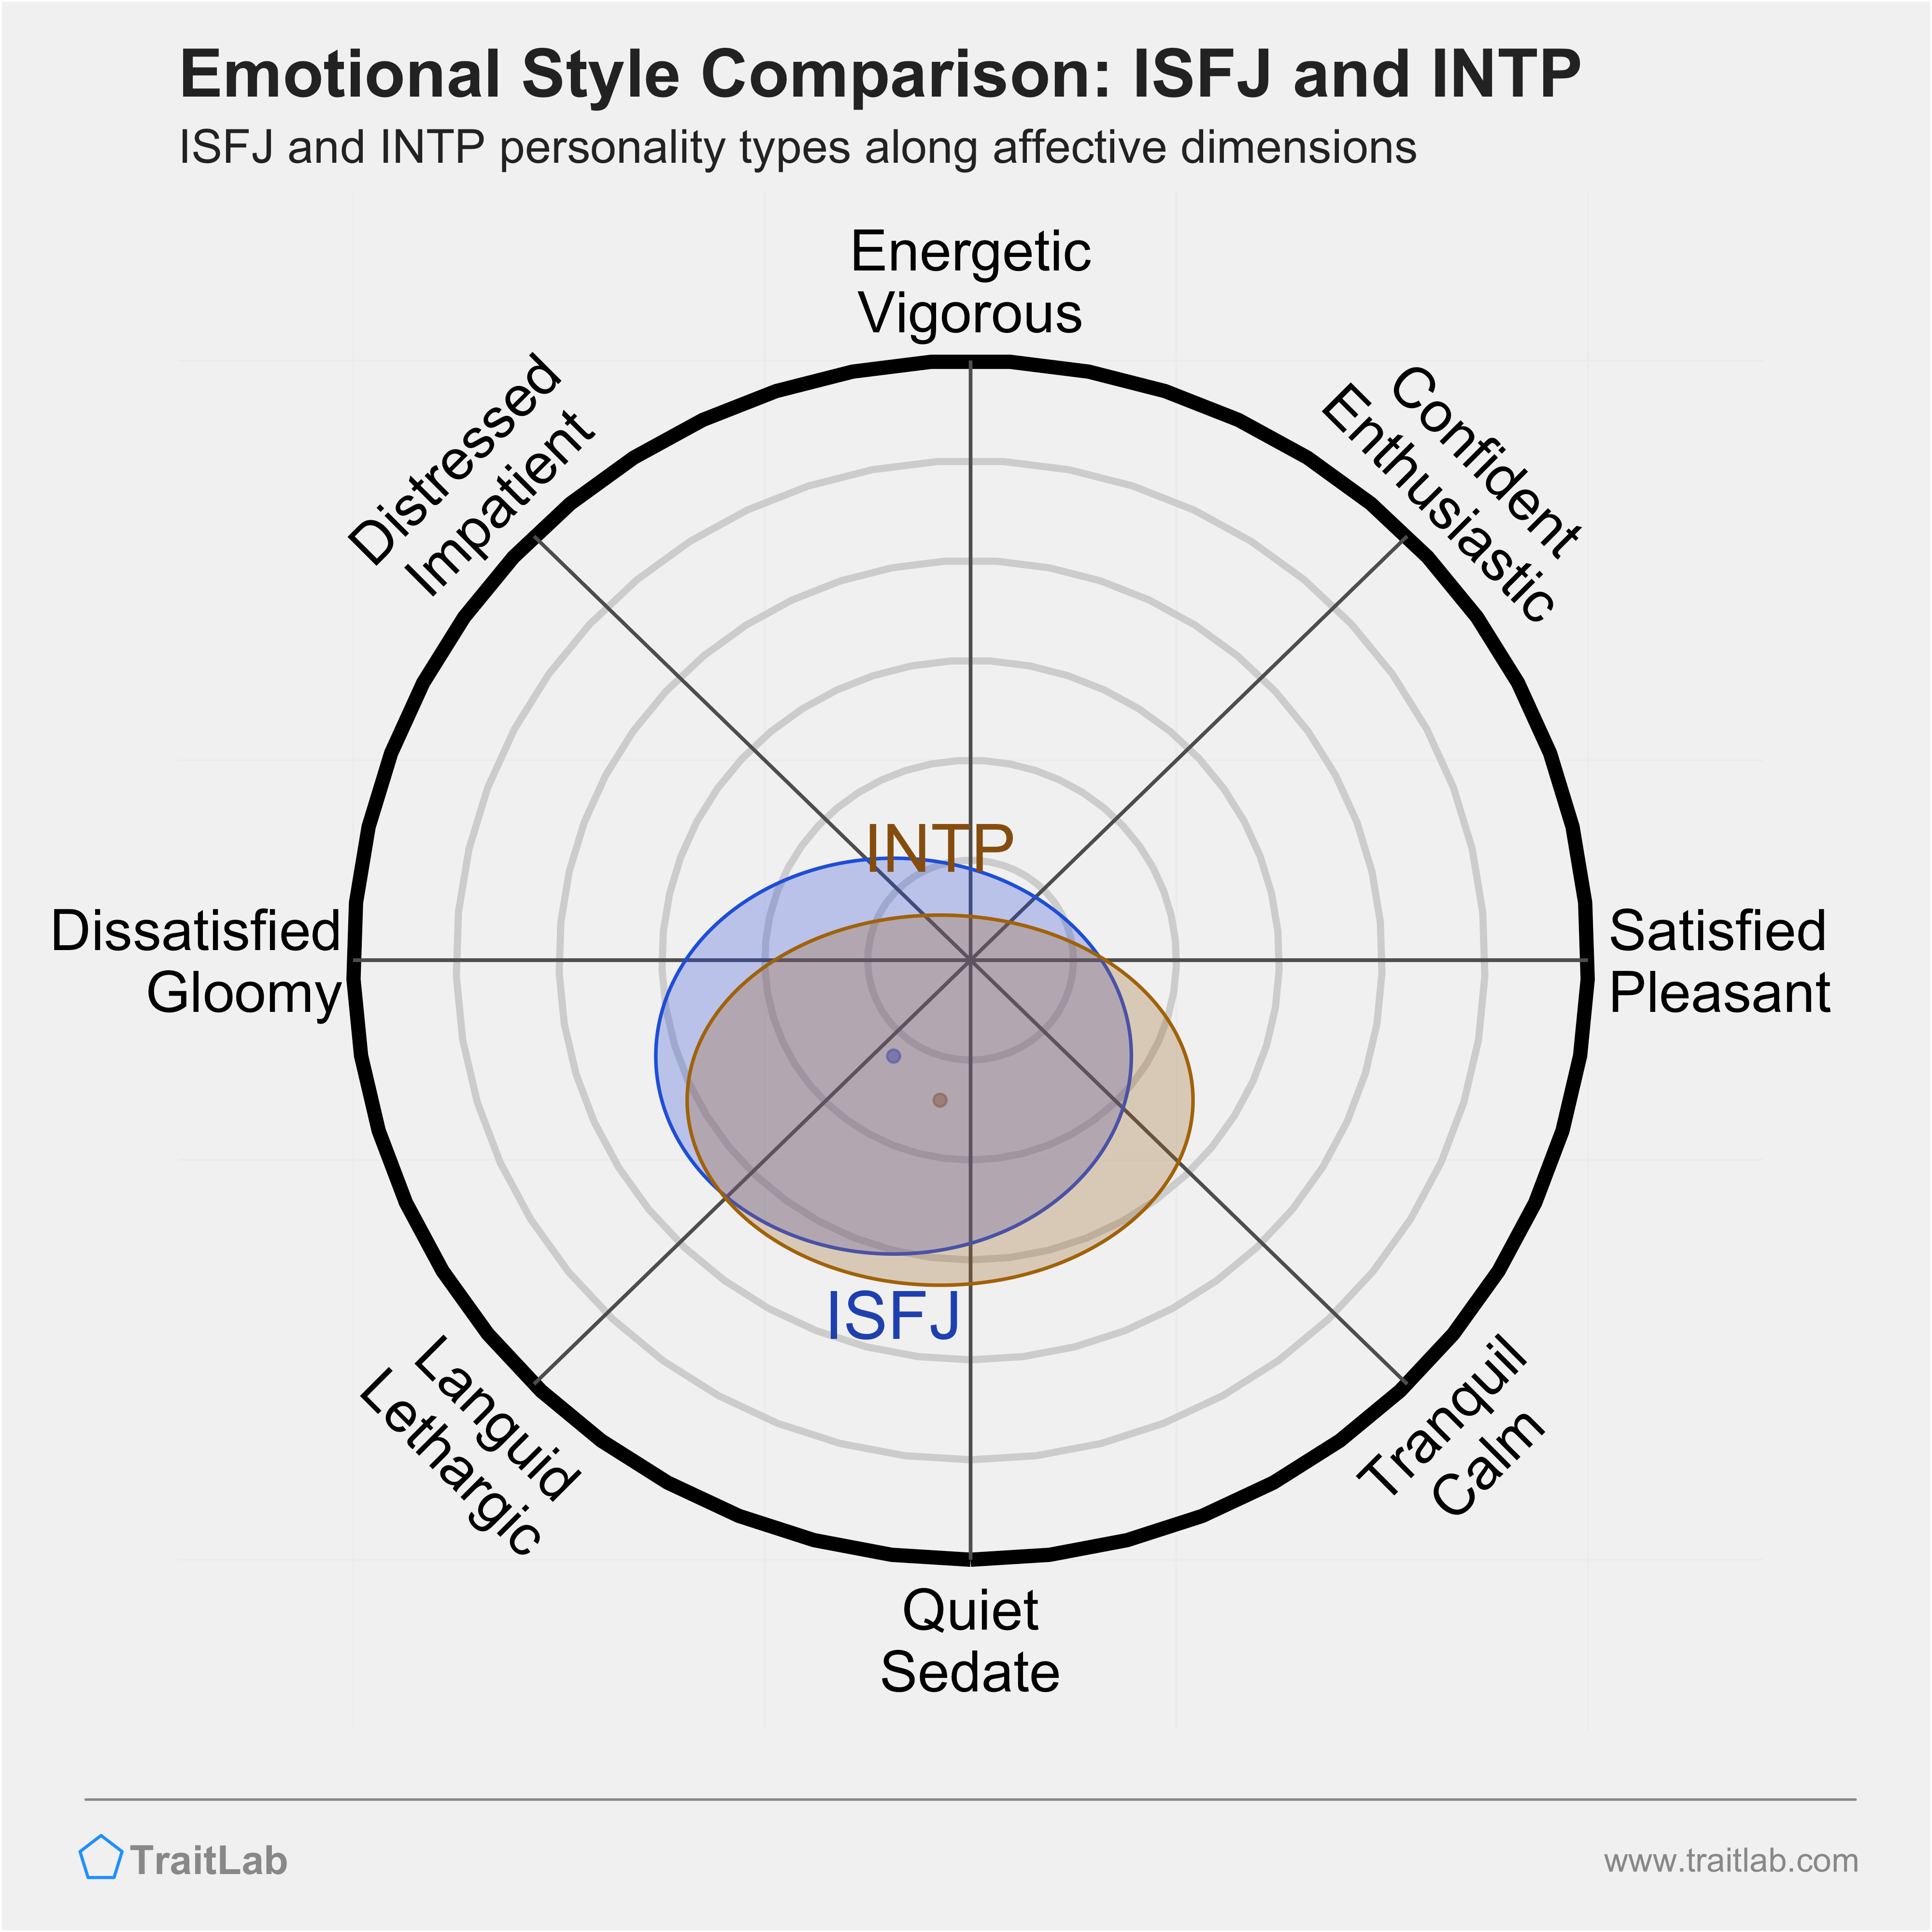 ISFJ and INTP comparison across emotional (affective) dimensions